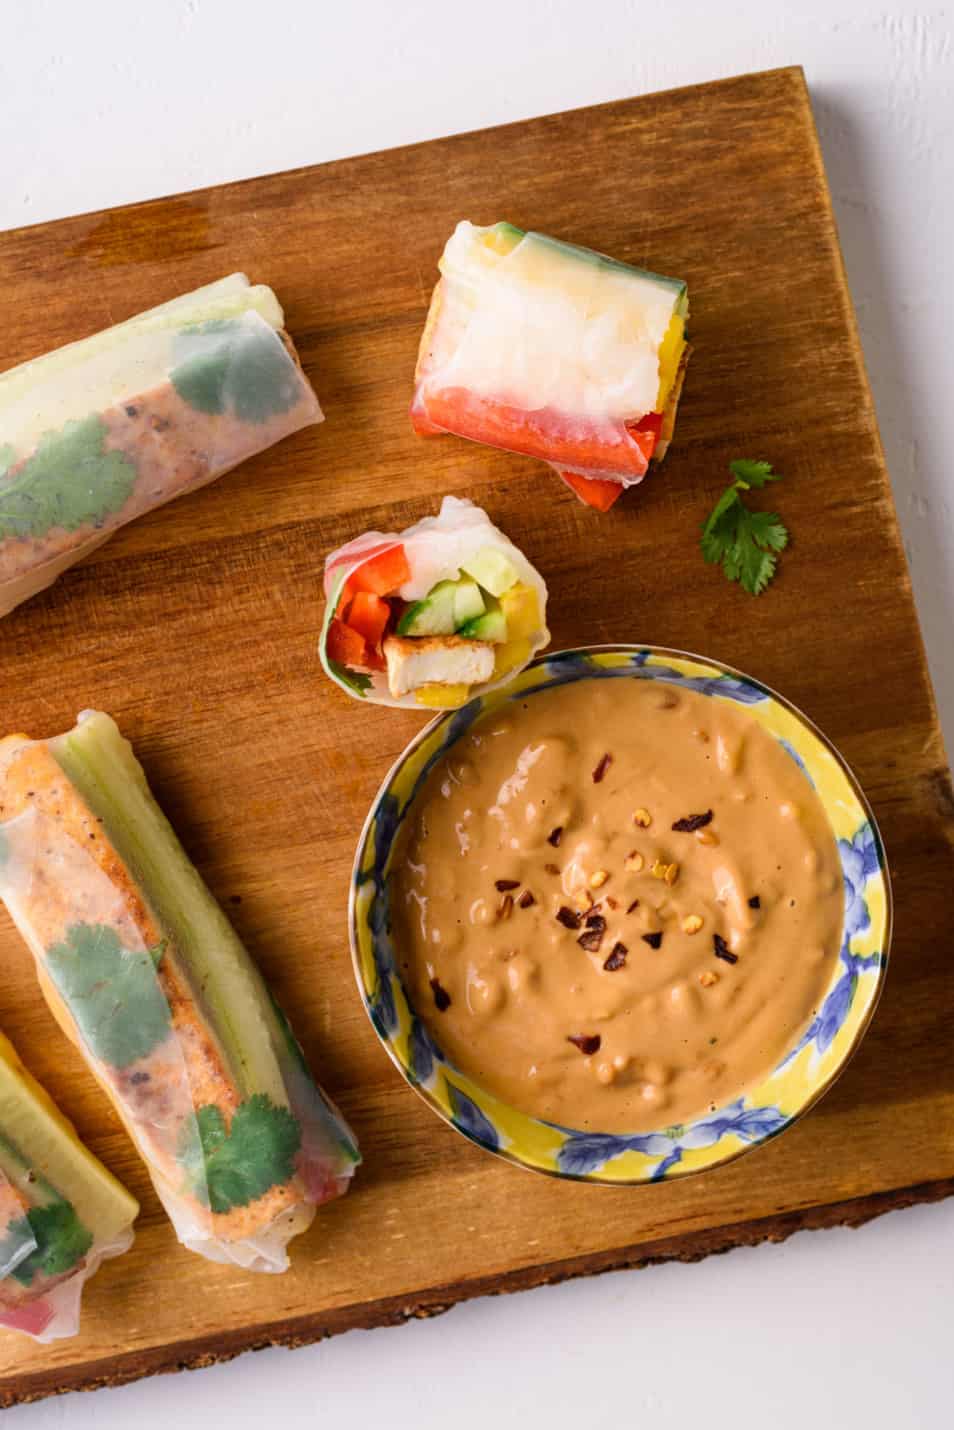 Vegan summer rolls on a wooden board next to a bowl of peanut sauce